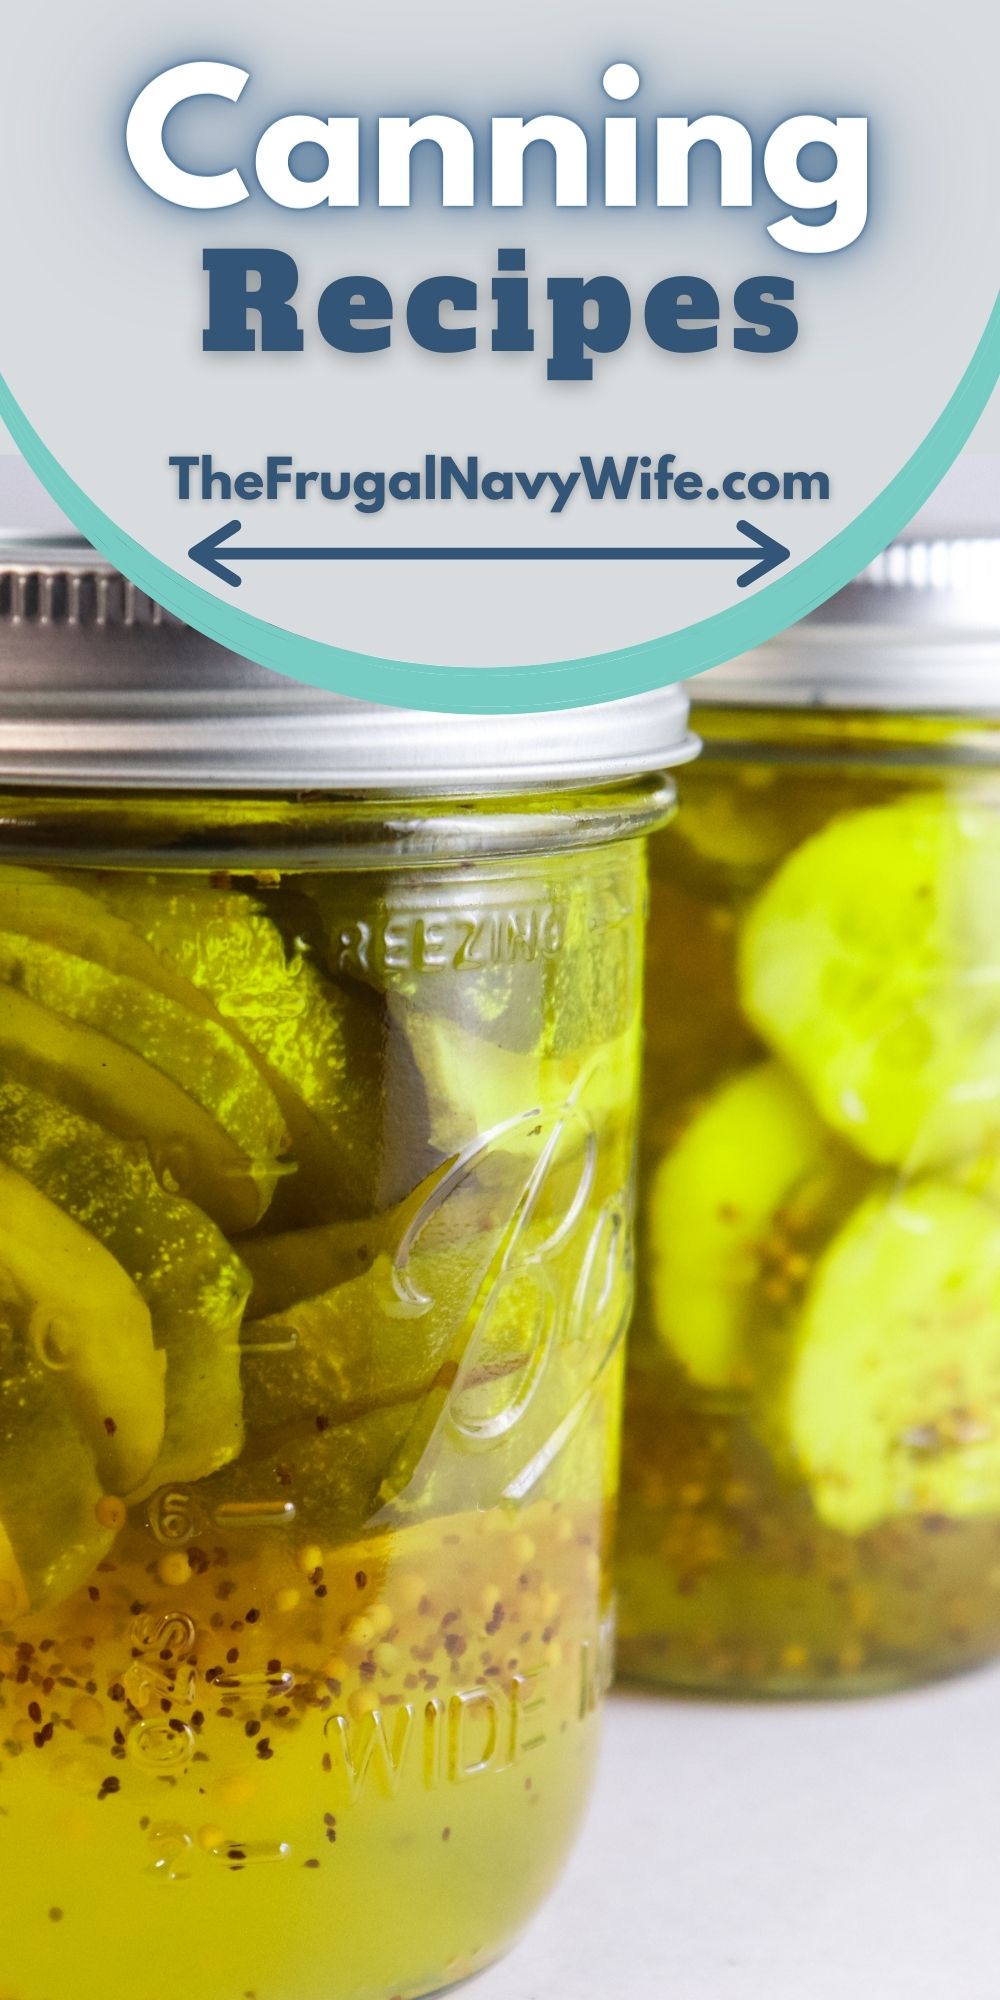 https://www.thefrugalnavywife.com/wp-content/uploads/2022/09/Canning-Recipes-Pin.jpg